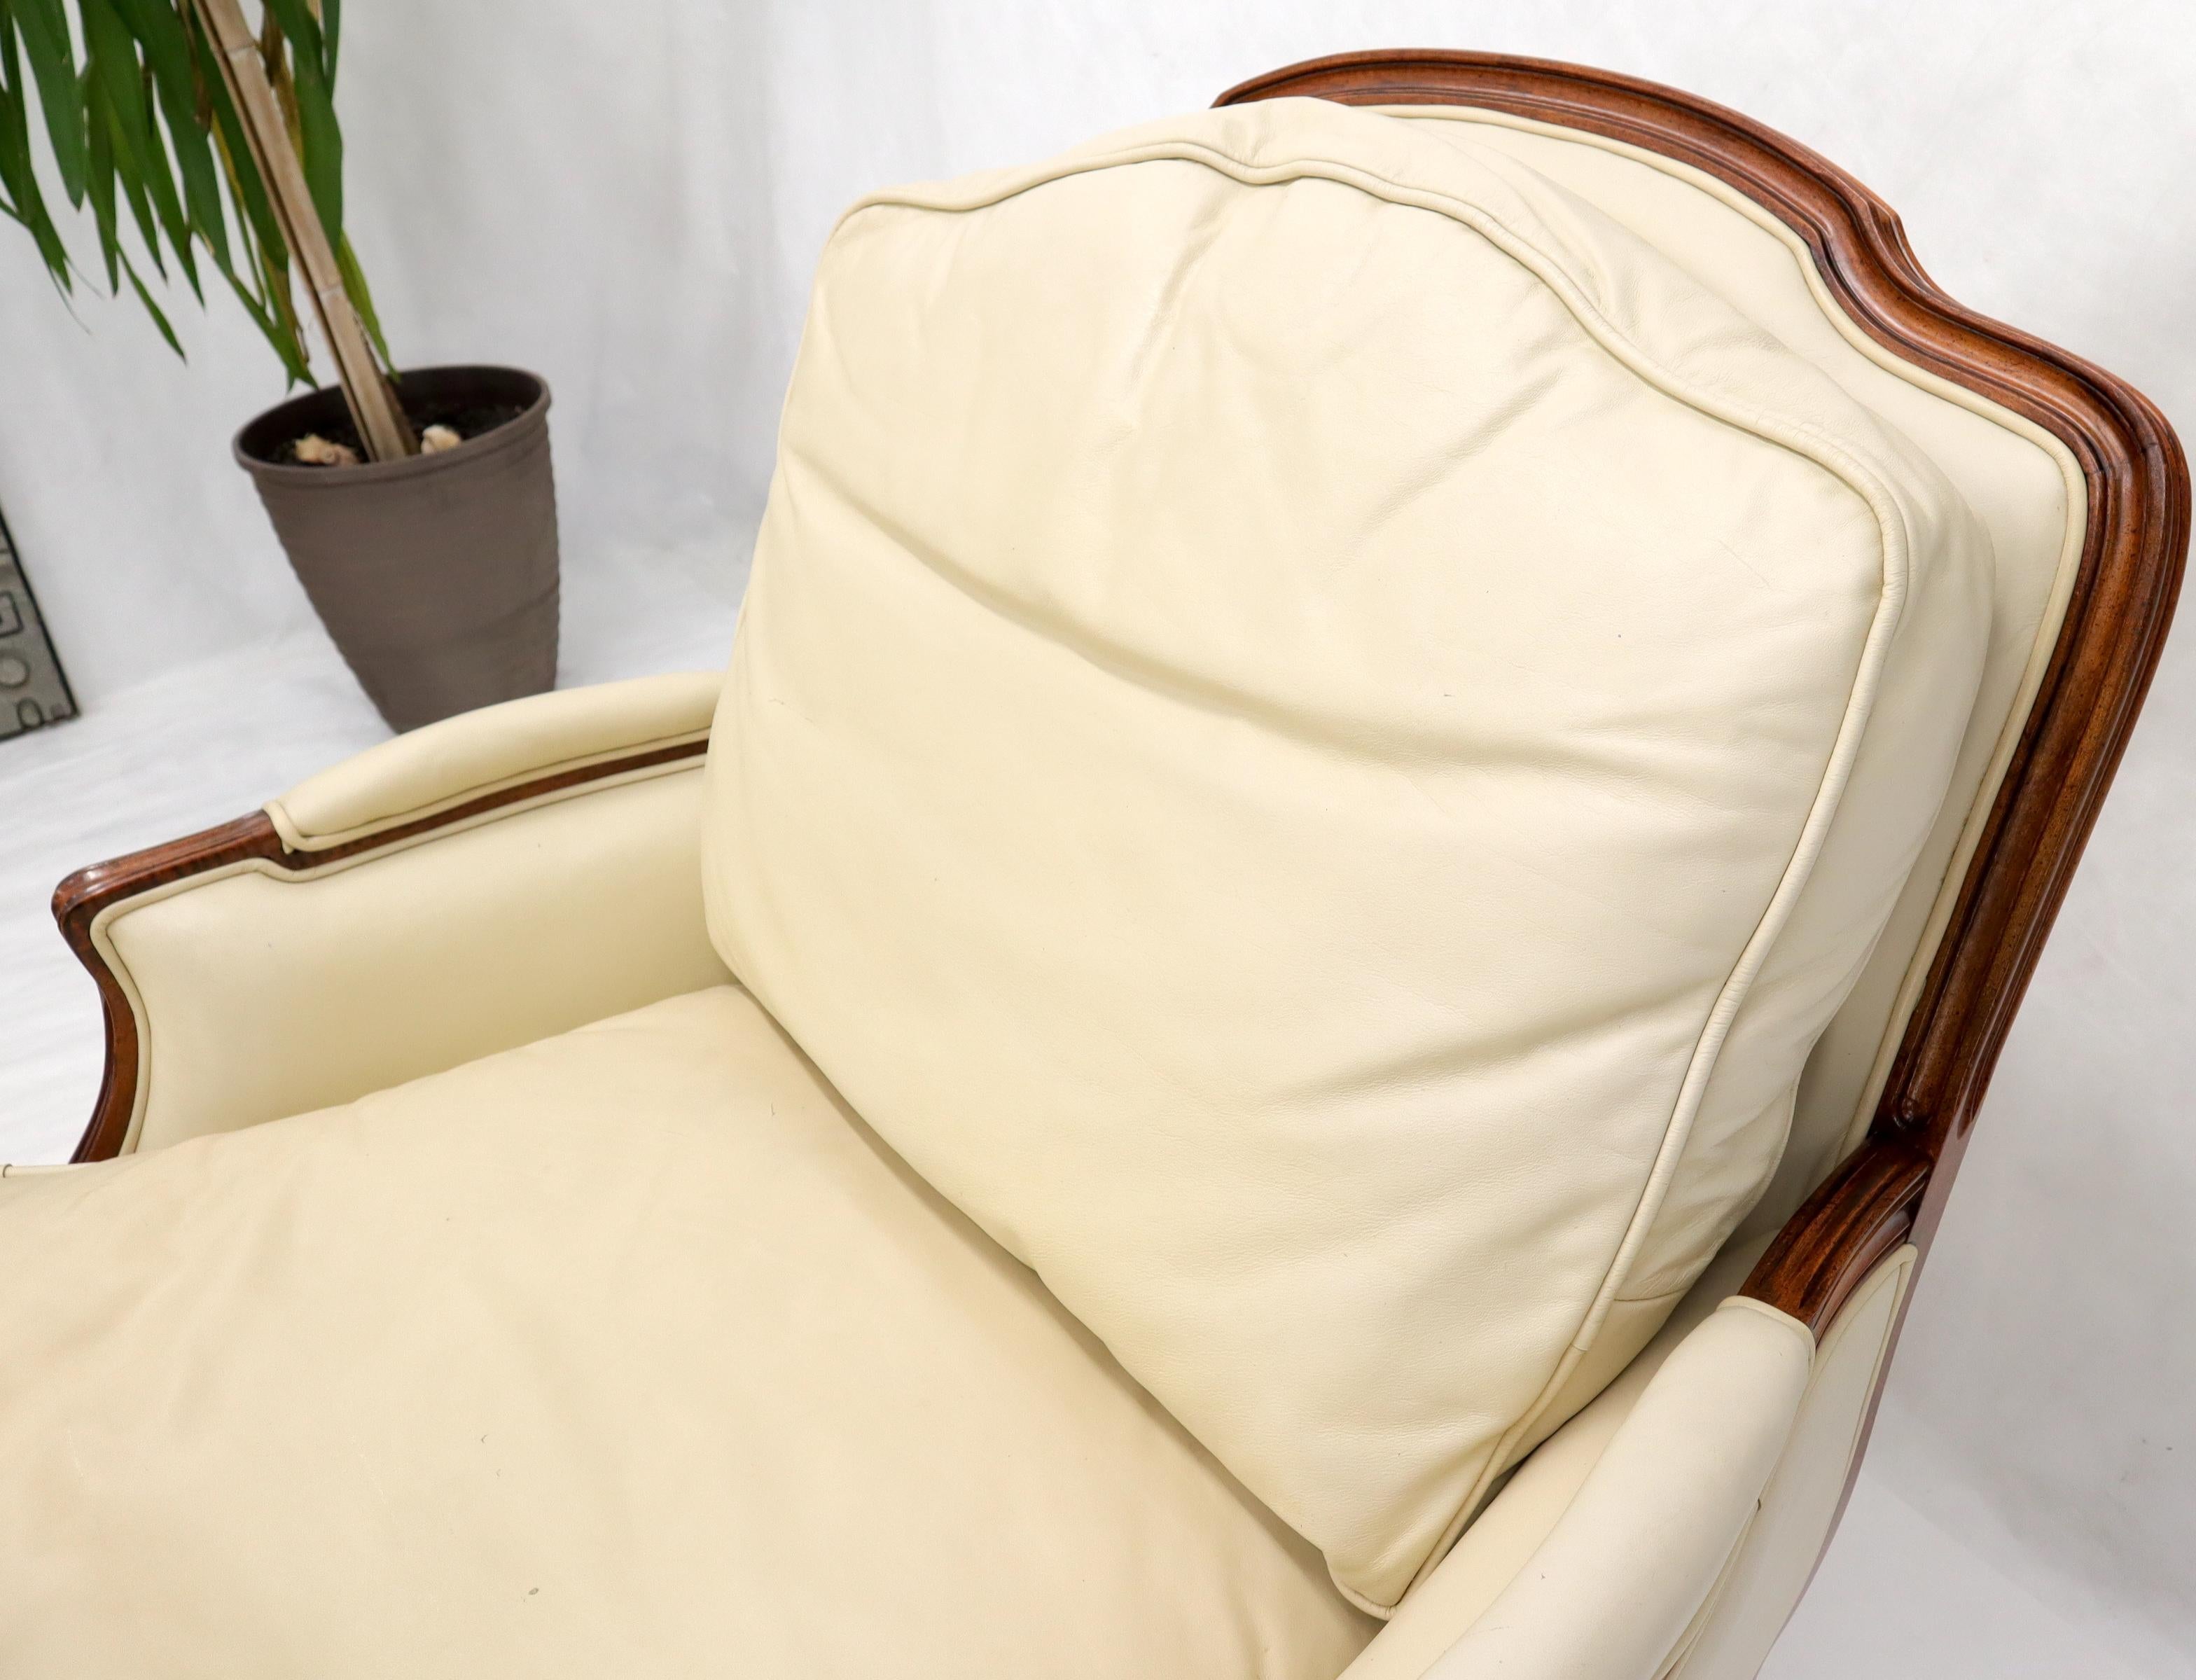 Cream Leather Chaise 2-Part Chaise Lounge Chair and Ottoman 4